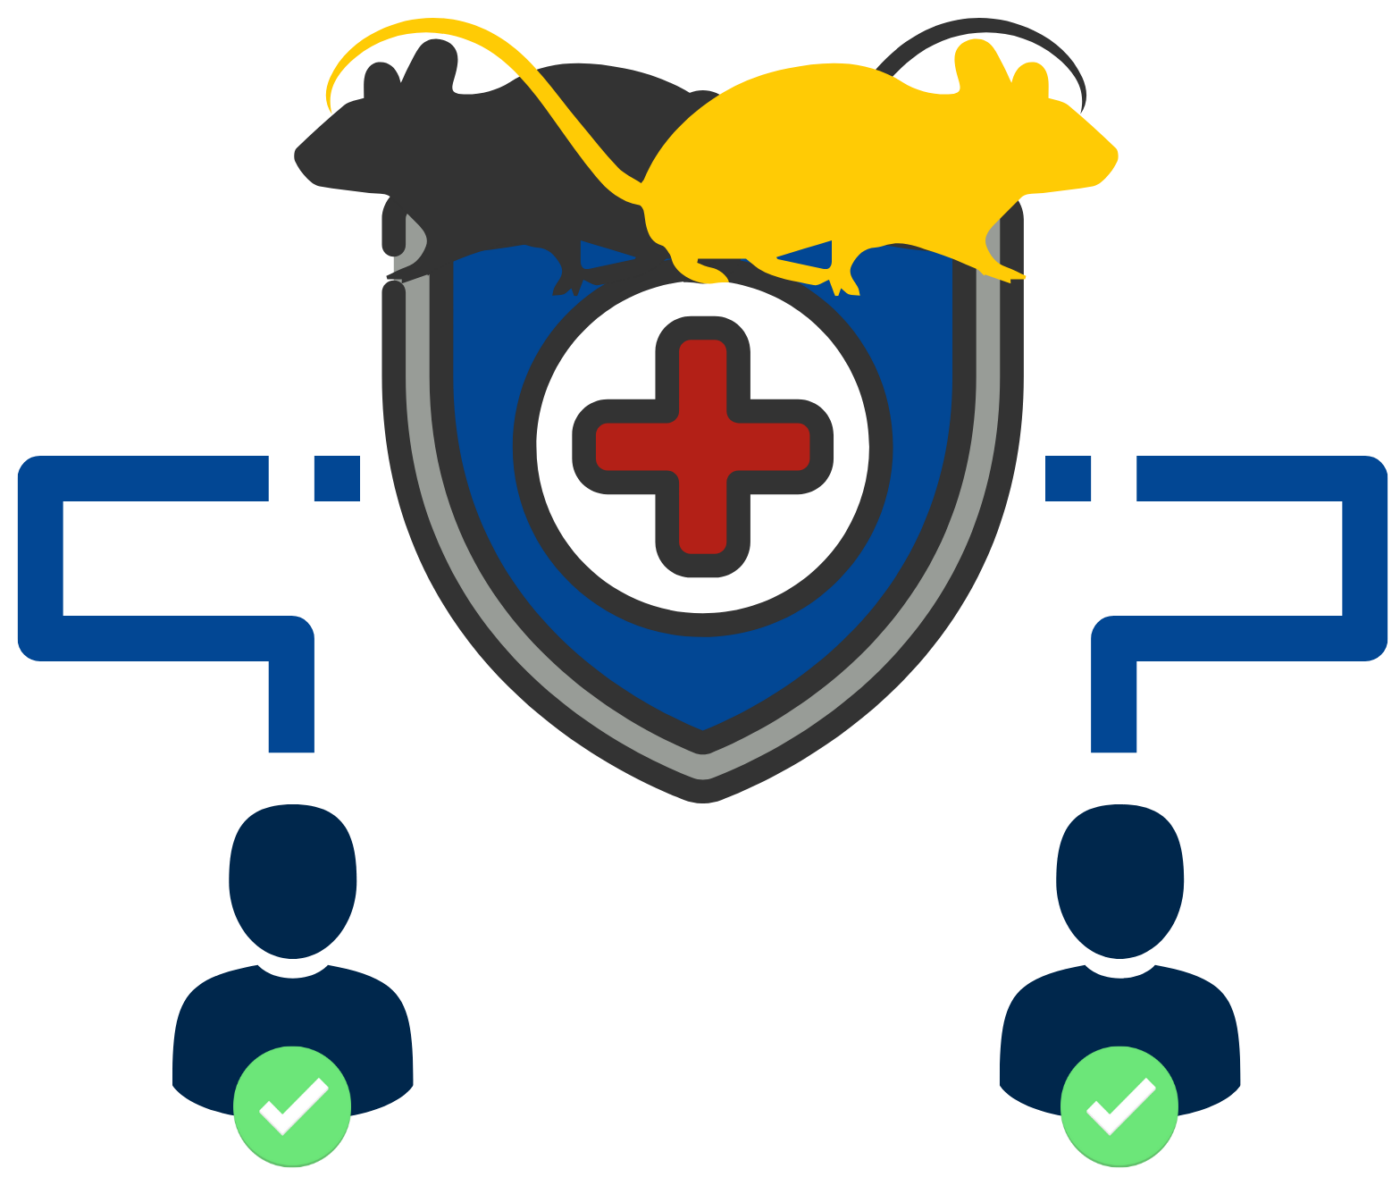 Personnel icons with lines leading back to mouse icons overlaid on animal health shield icon